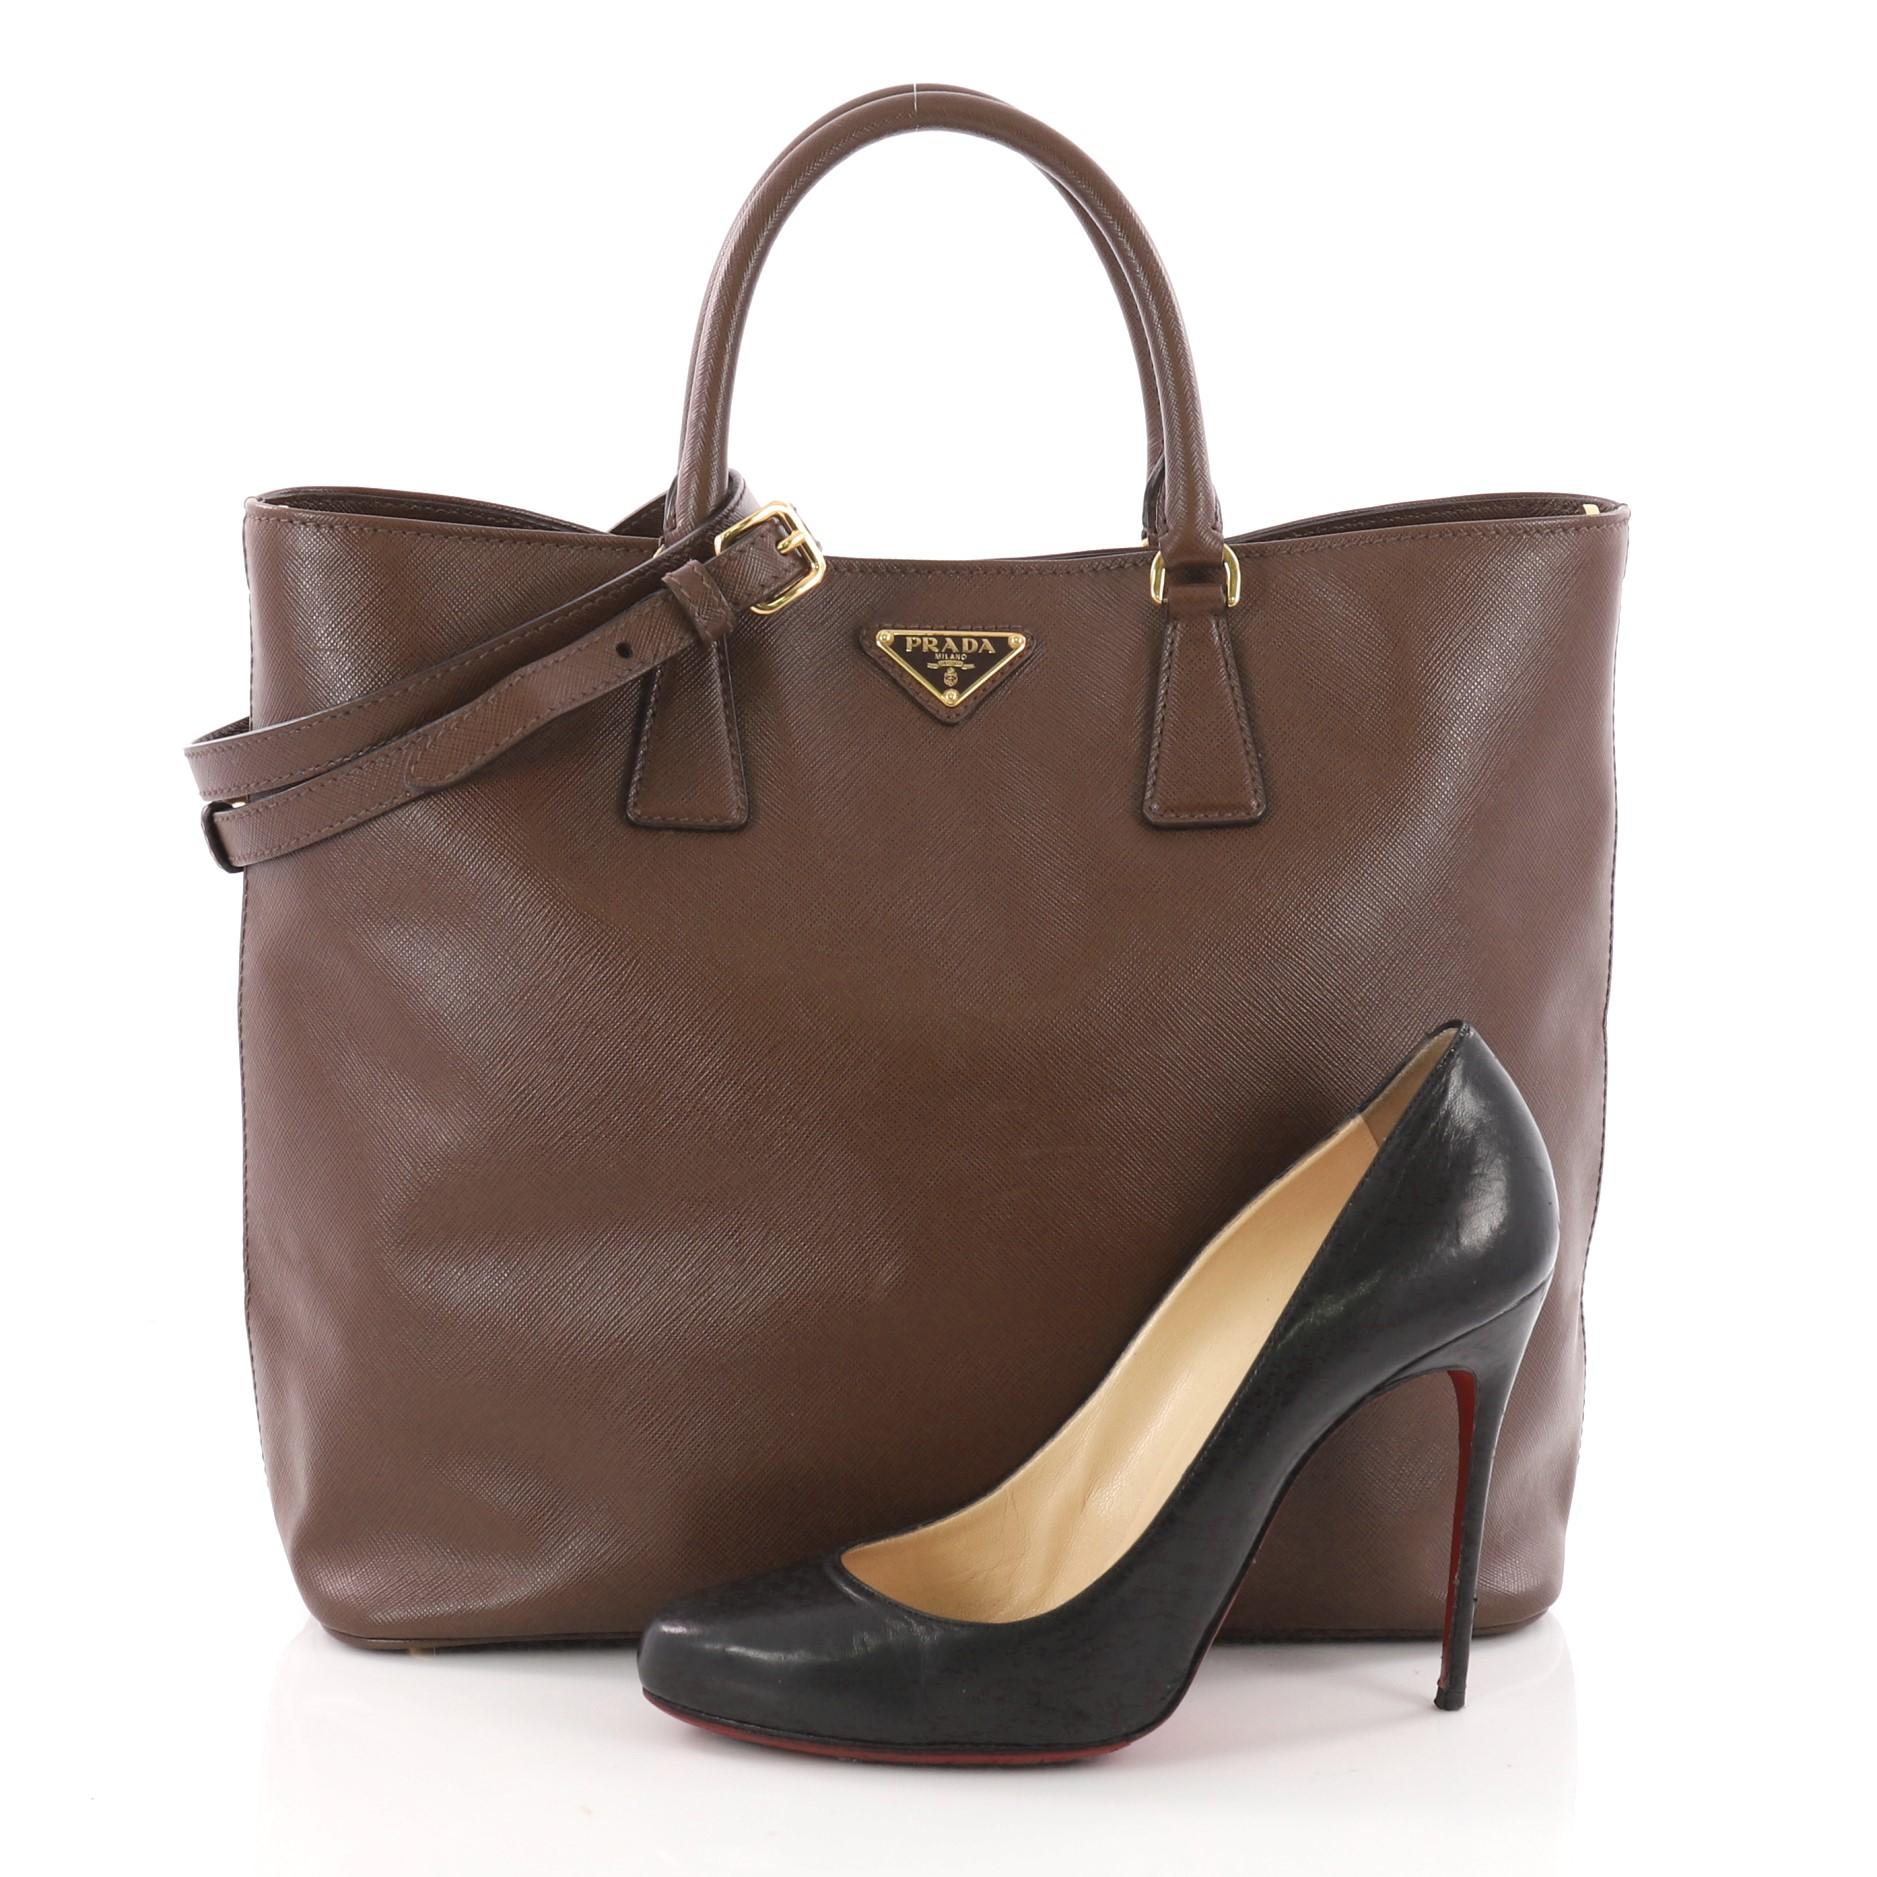 This authentic Prada Convertible Open Tote Saffiano Leather Medium is elegant in its simplicity and structure. Crafted in brown saffiano leather, this stylish yet functional tote features dual-top handles, protective base studs, signature raised